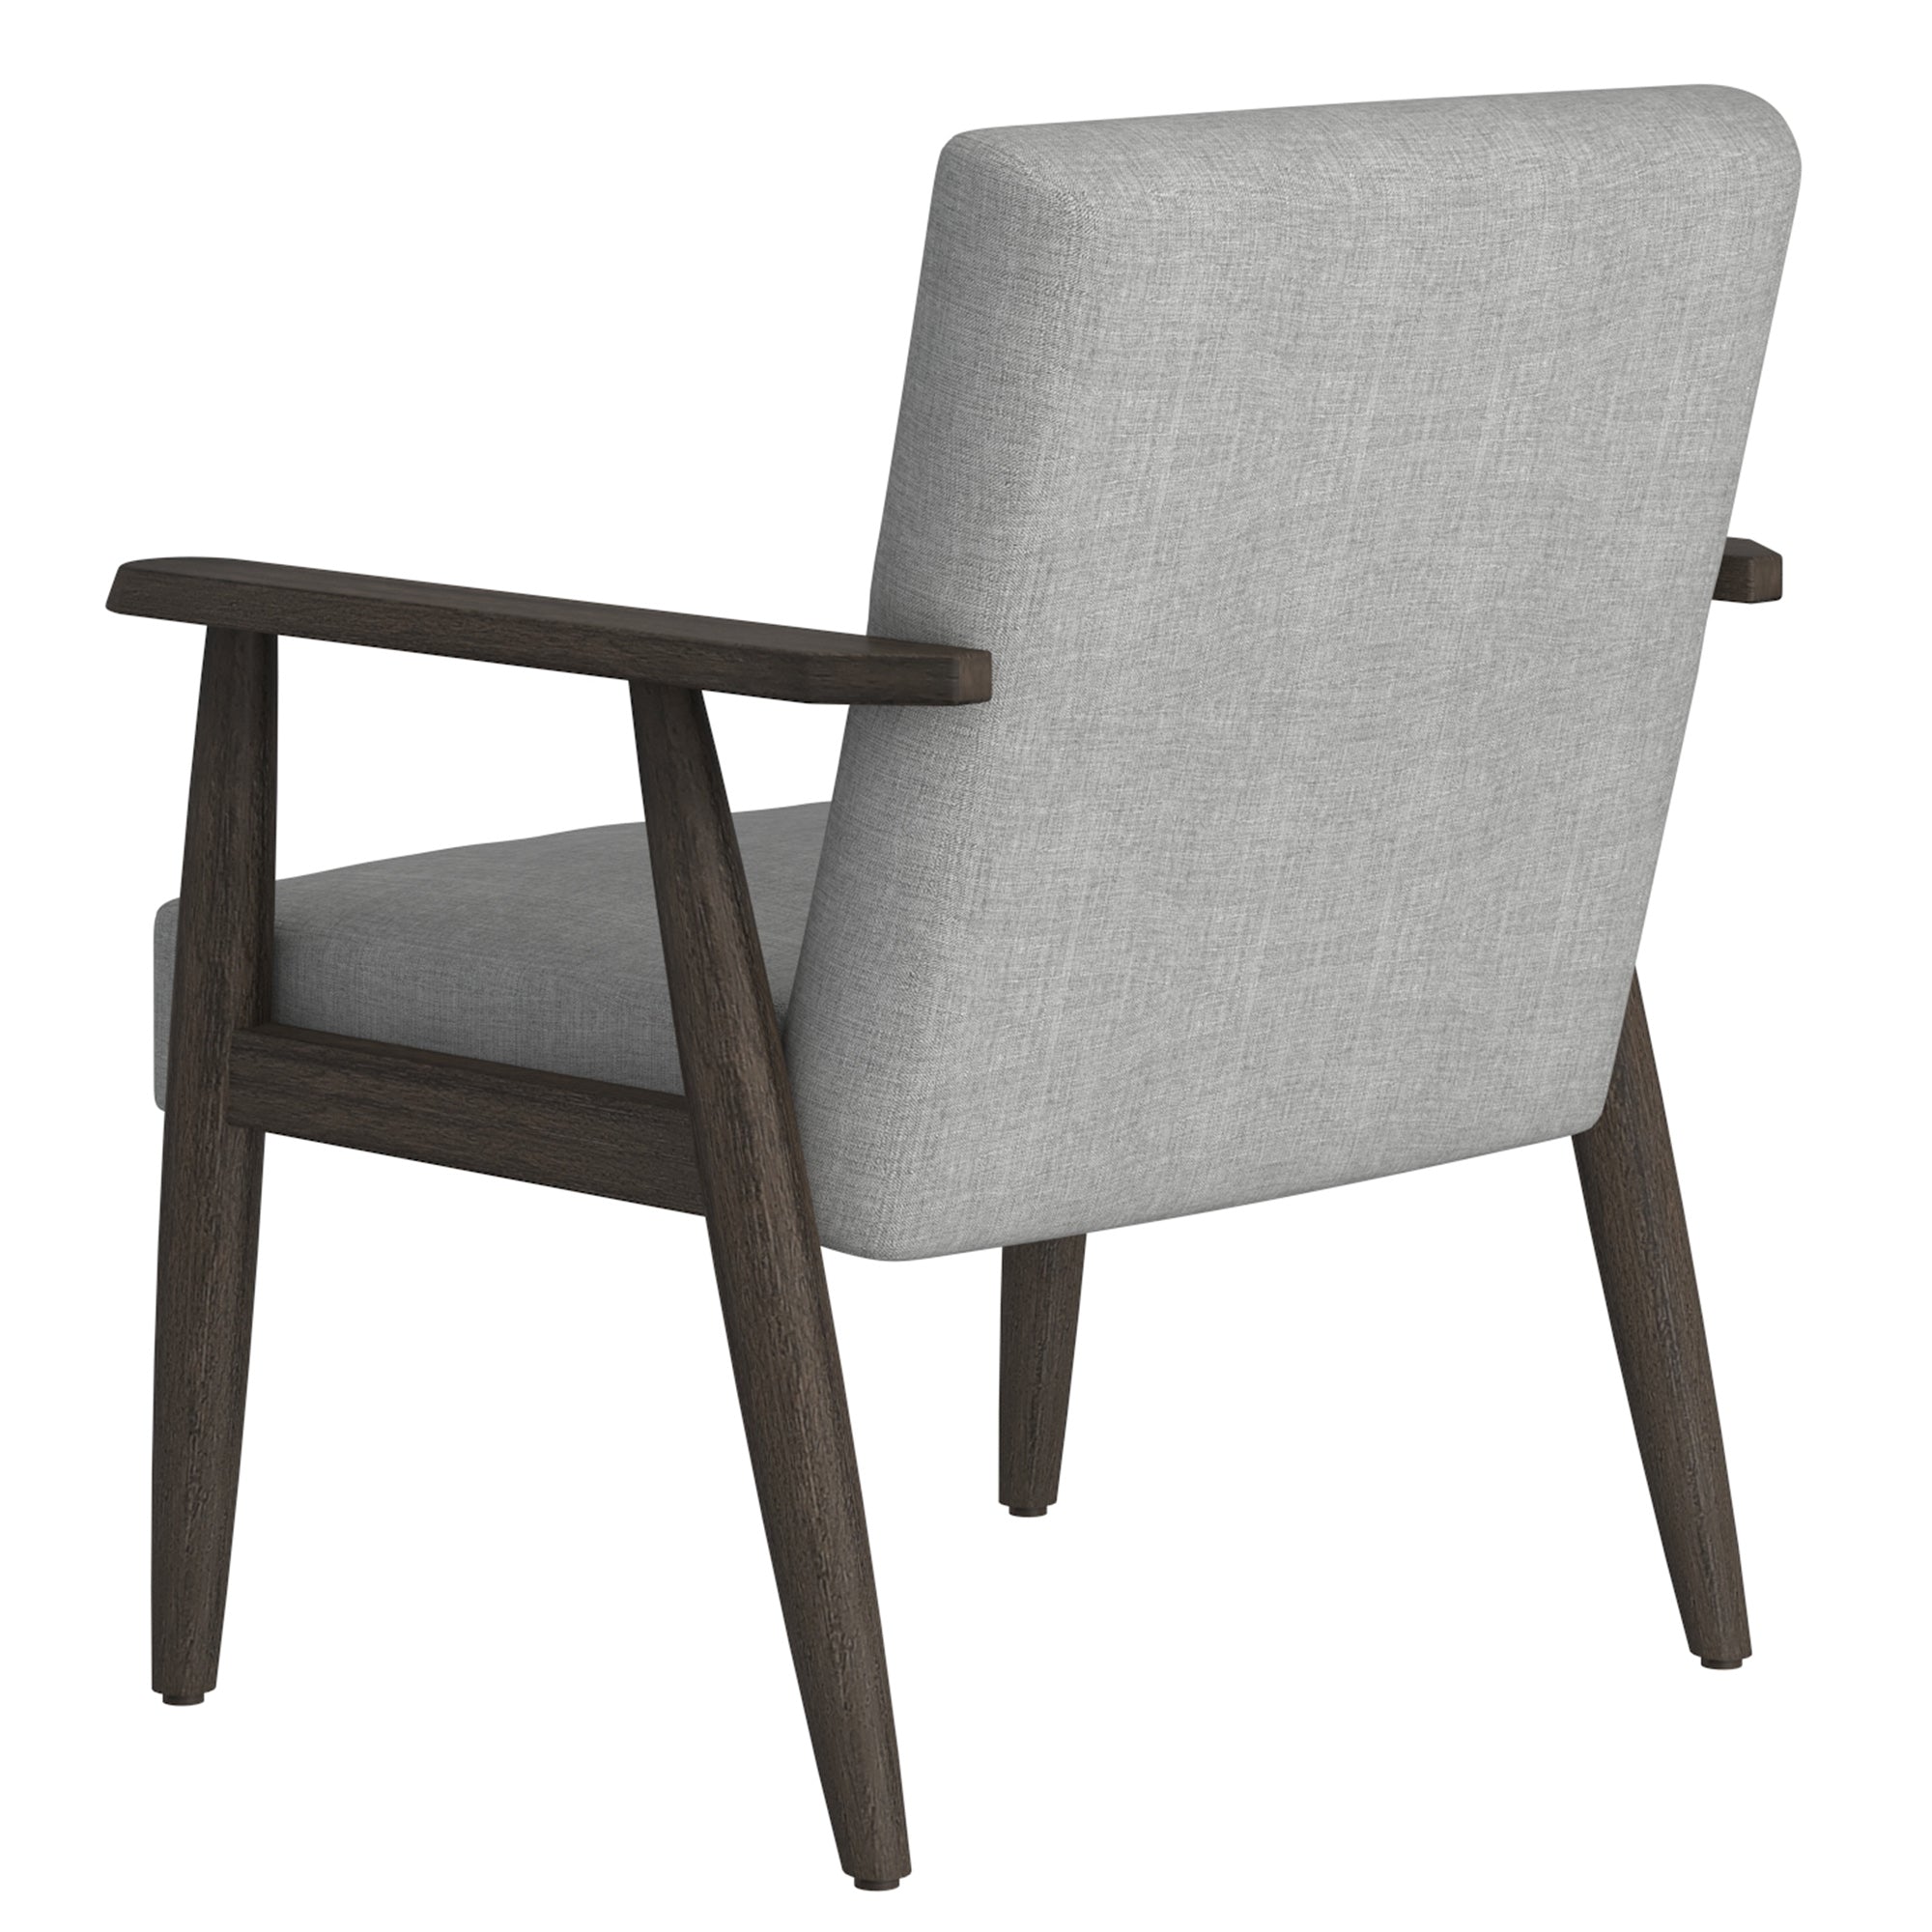 HUXLY-ACCENT CHAIR-GREY